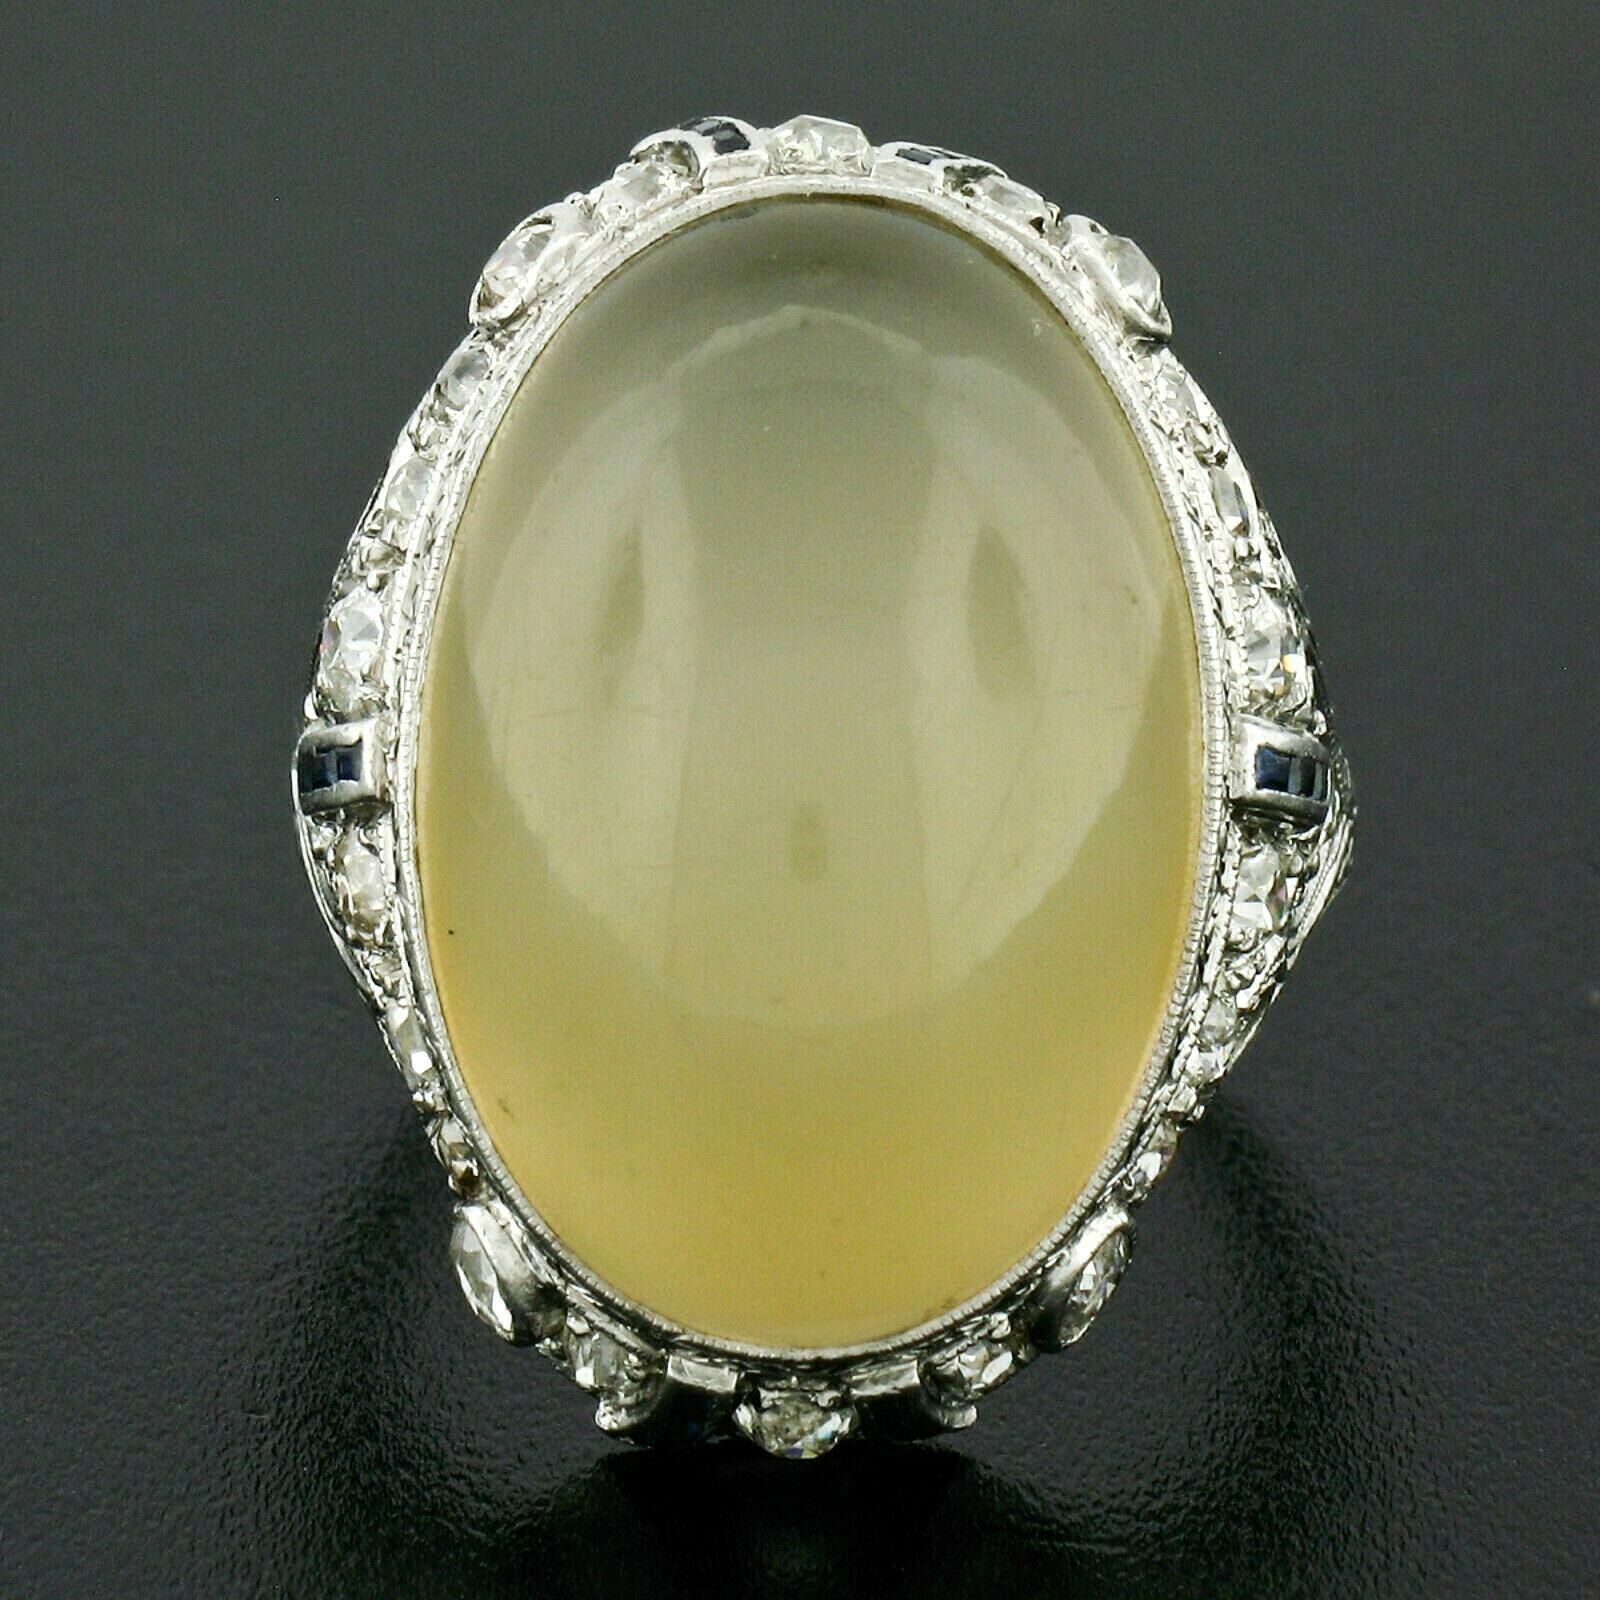 This magnificent antique cocktail ring was crafted from solid 900 platinum during the art deco period. The ring features a large, approximately 22x15mm, translucent pale yellow moonstone bezel set at its center. The center stone is surrounded by